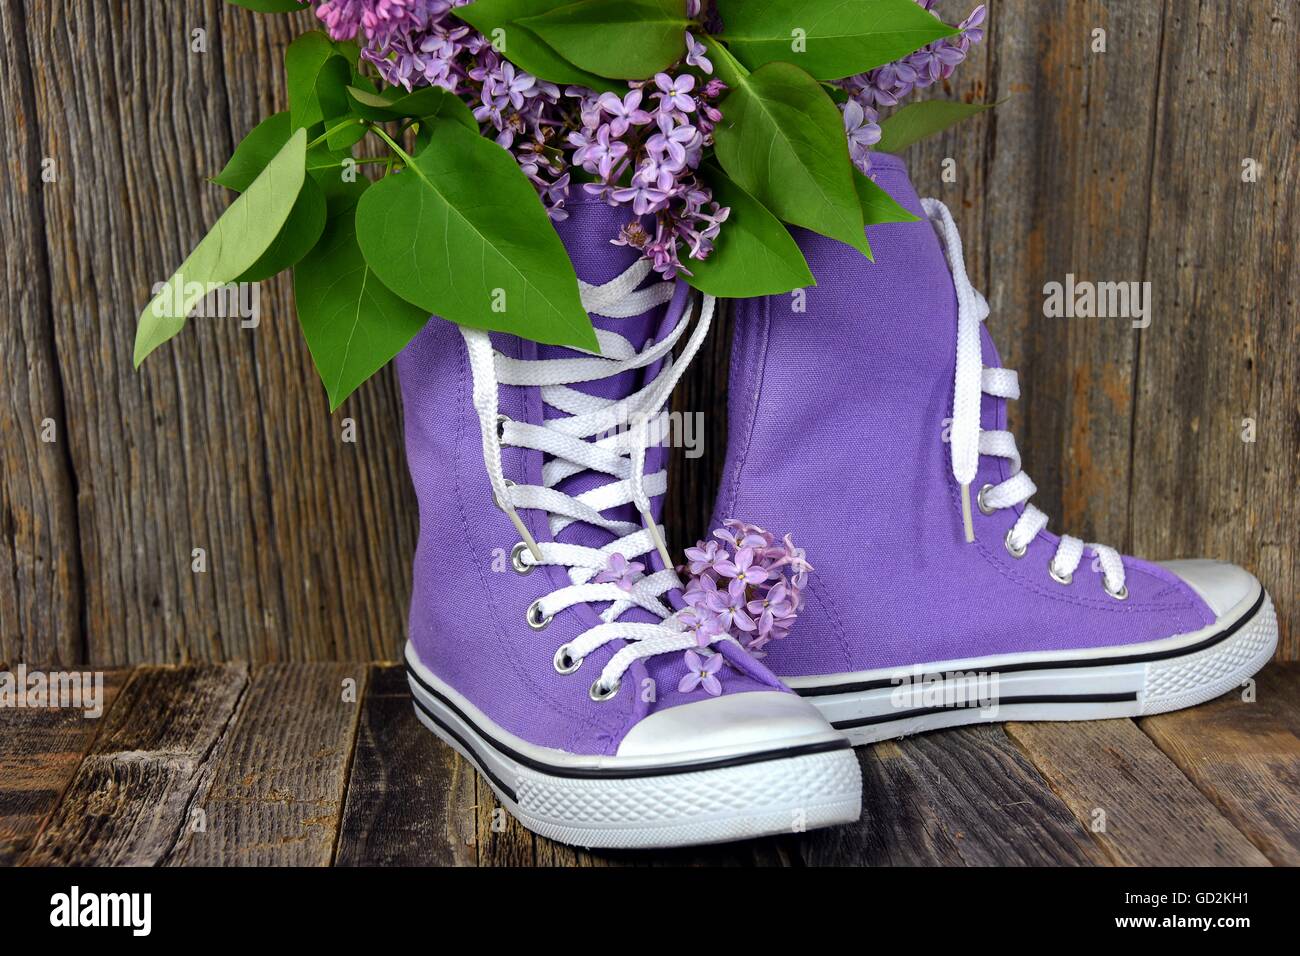 Lilac bouquet in a pair of purple high top sneakers on rustic barn wood. Stock Photo